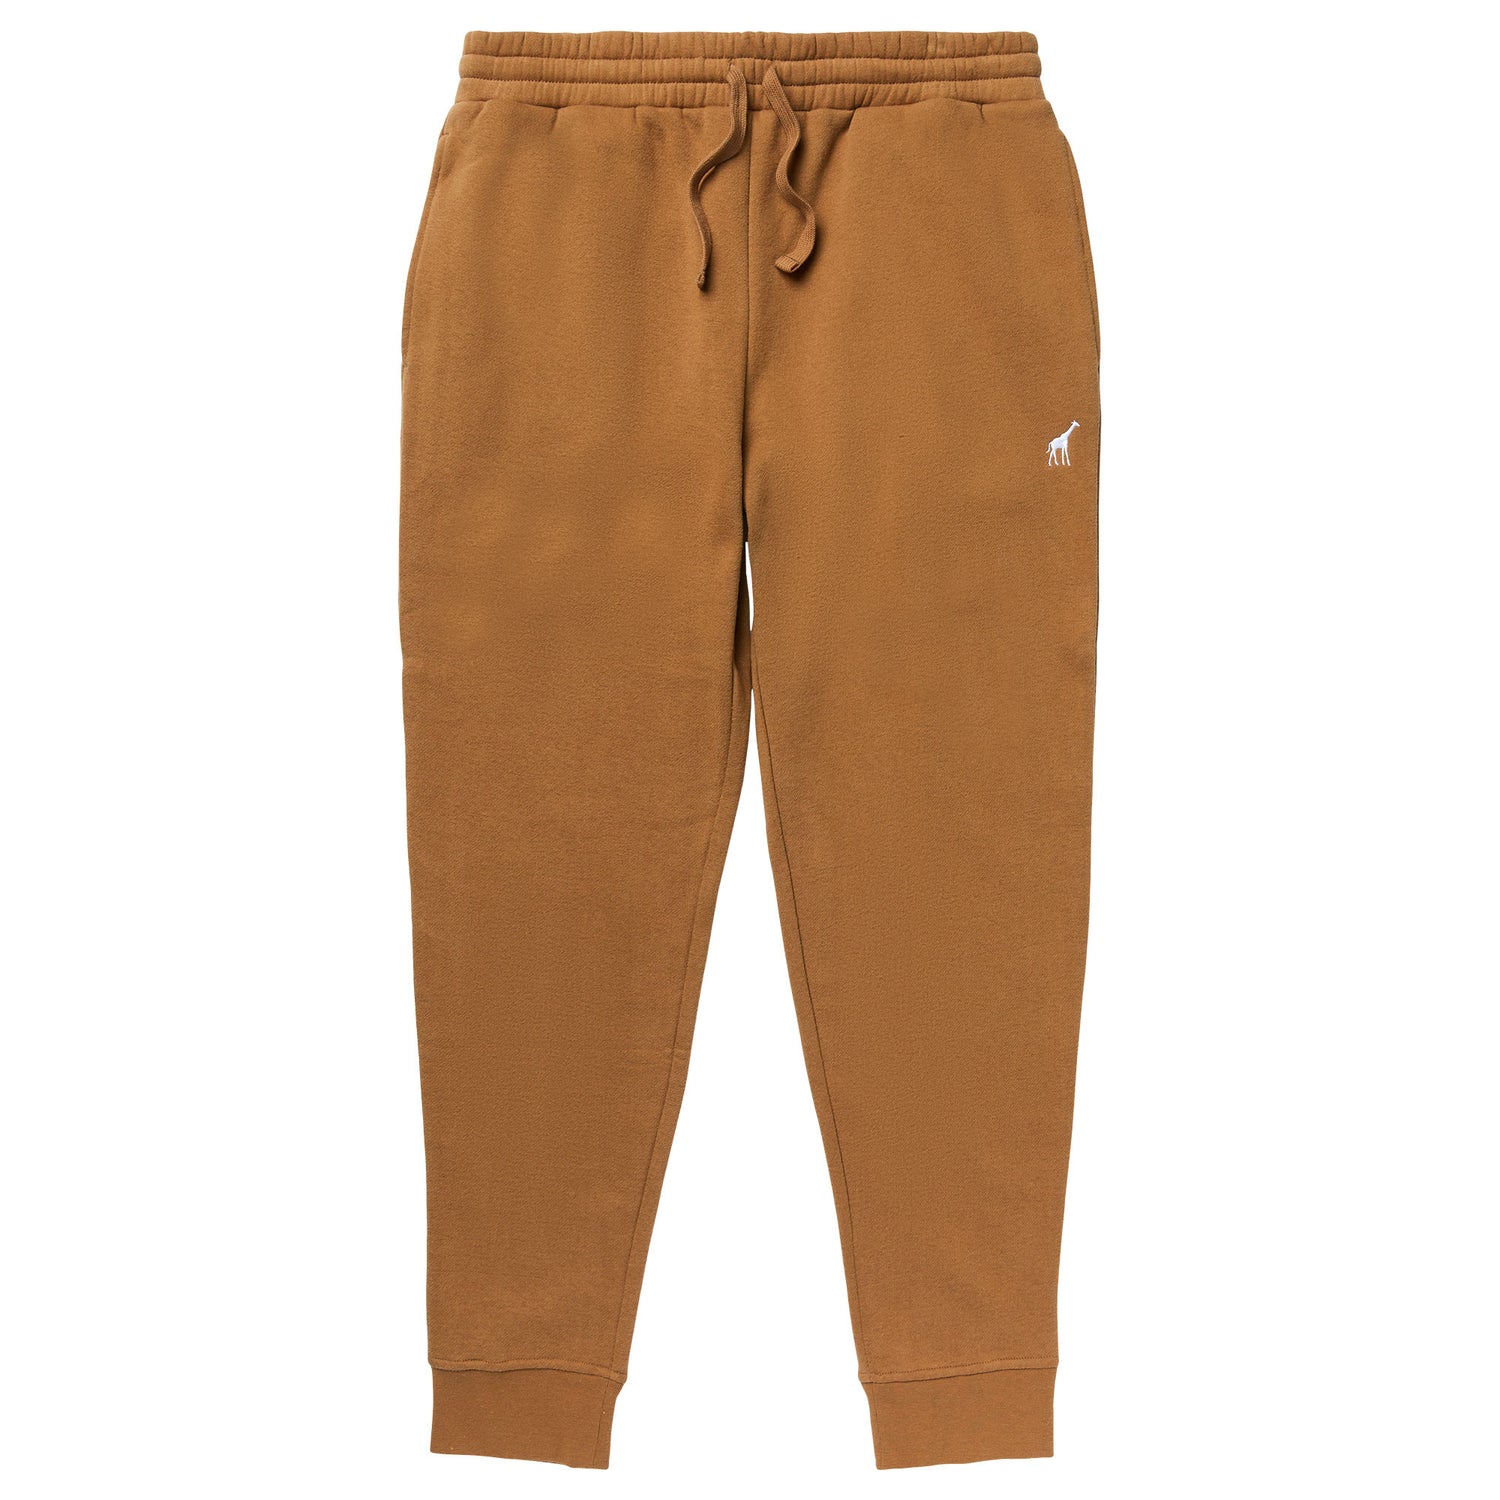 KETCH Structured Solid Men Brown Track Pants - Buy KETCH Structured Solid  Men Brown Track Pants Online at Best Prices in India | Flipkart.com